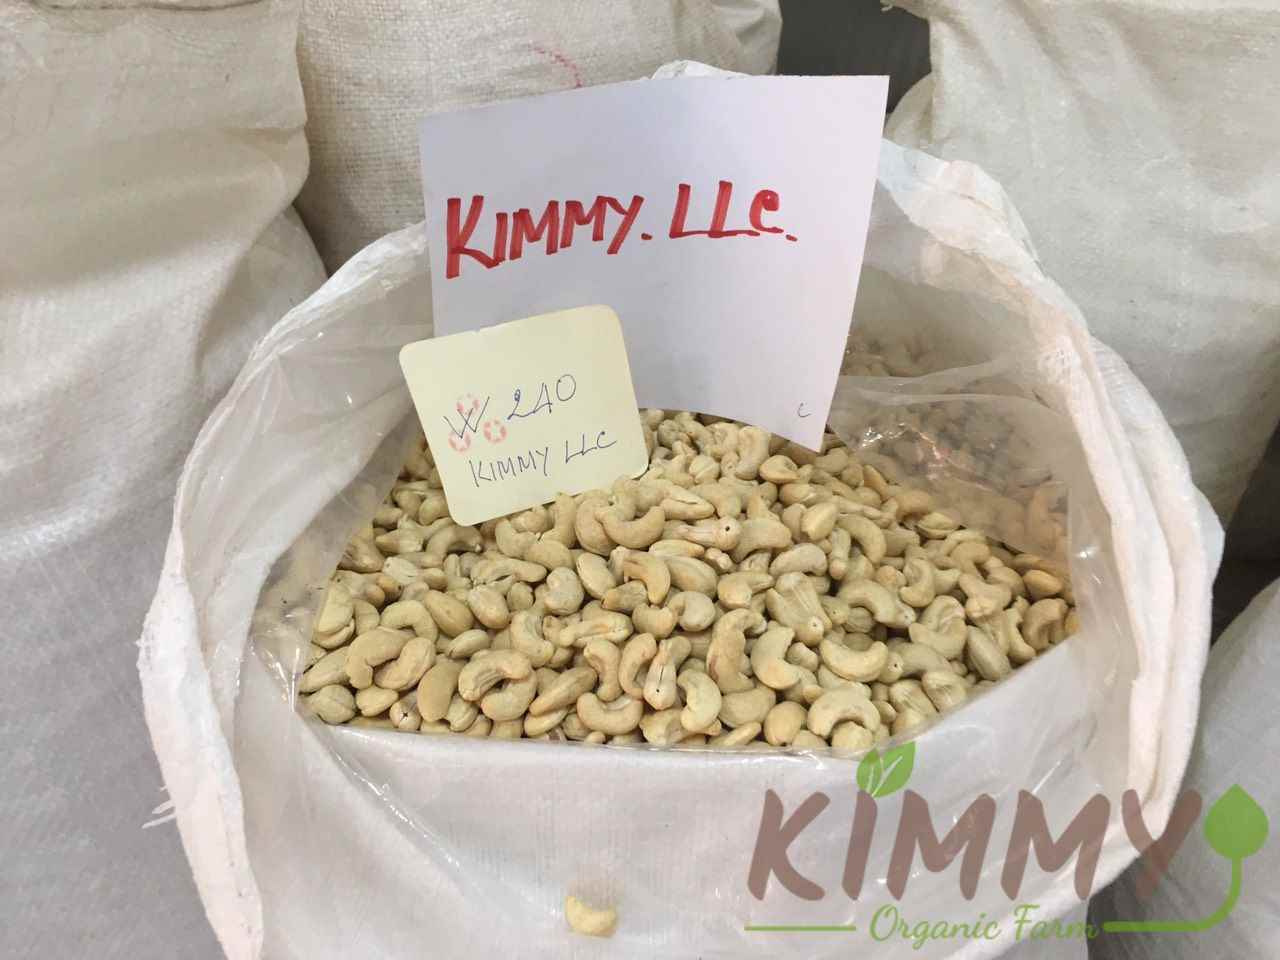 Vietnam W240 Cashew Nut White Whole Cashews High Quality Ready For Export Raw Image Of W240 From Our Cashew Factory!